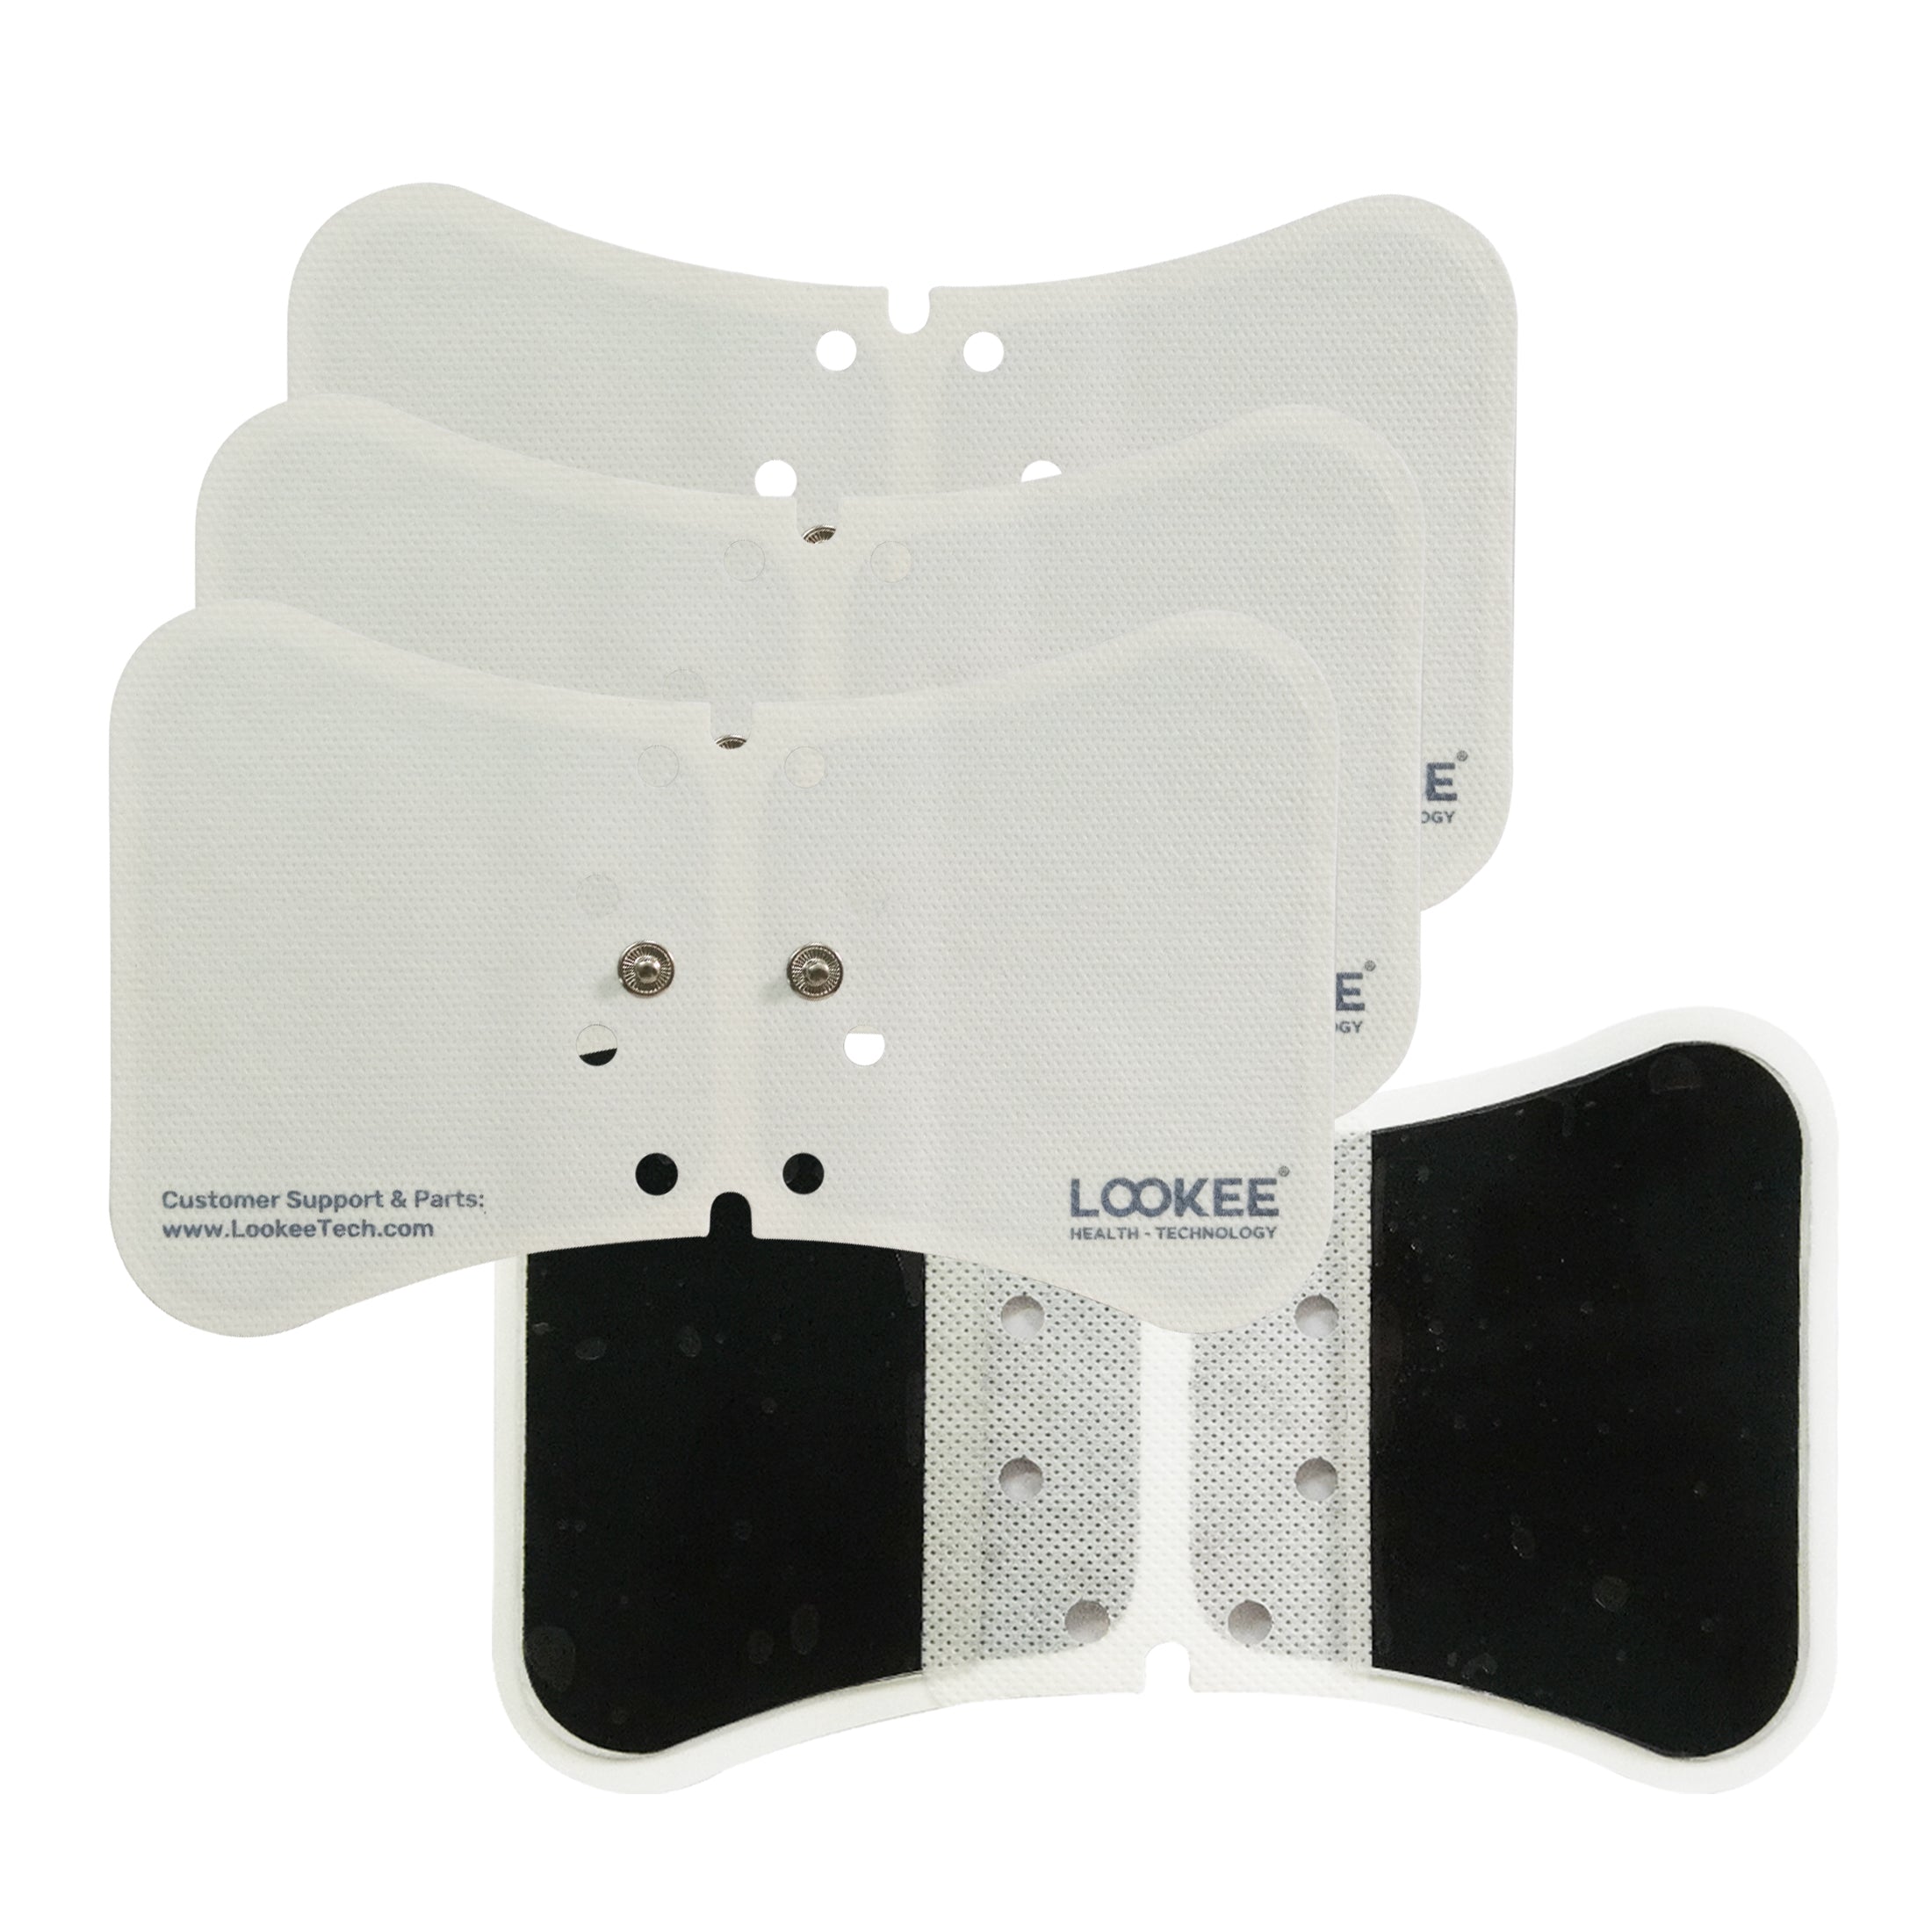 TENS/EMS Conductive Gel Pad Replacements • LED Technologies, Inc